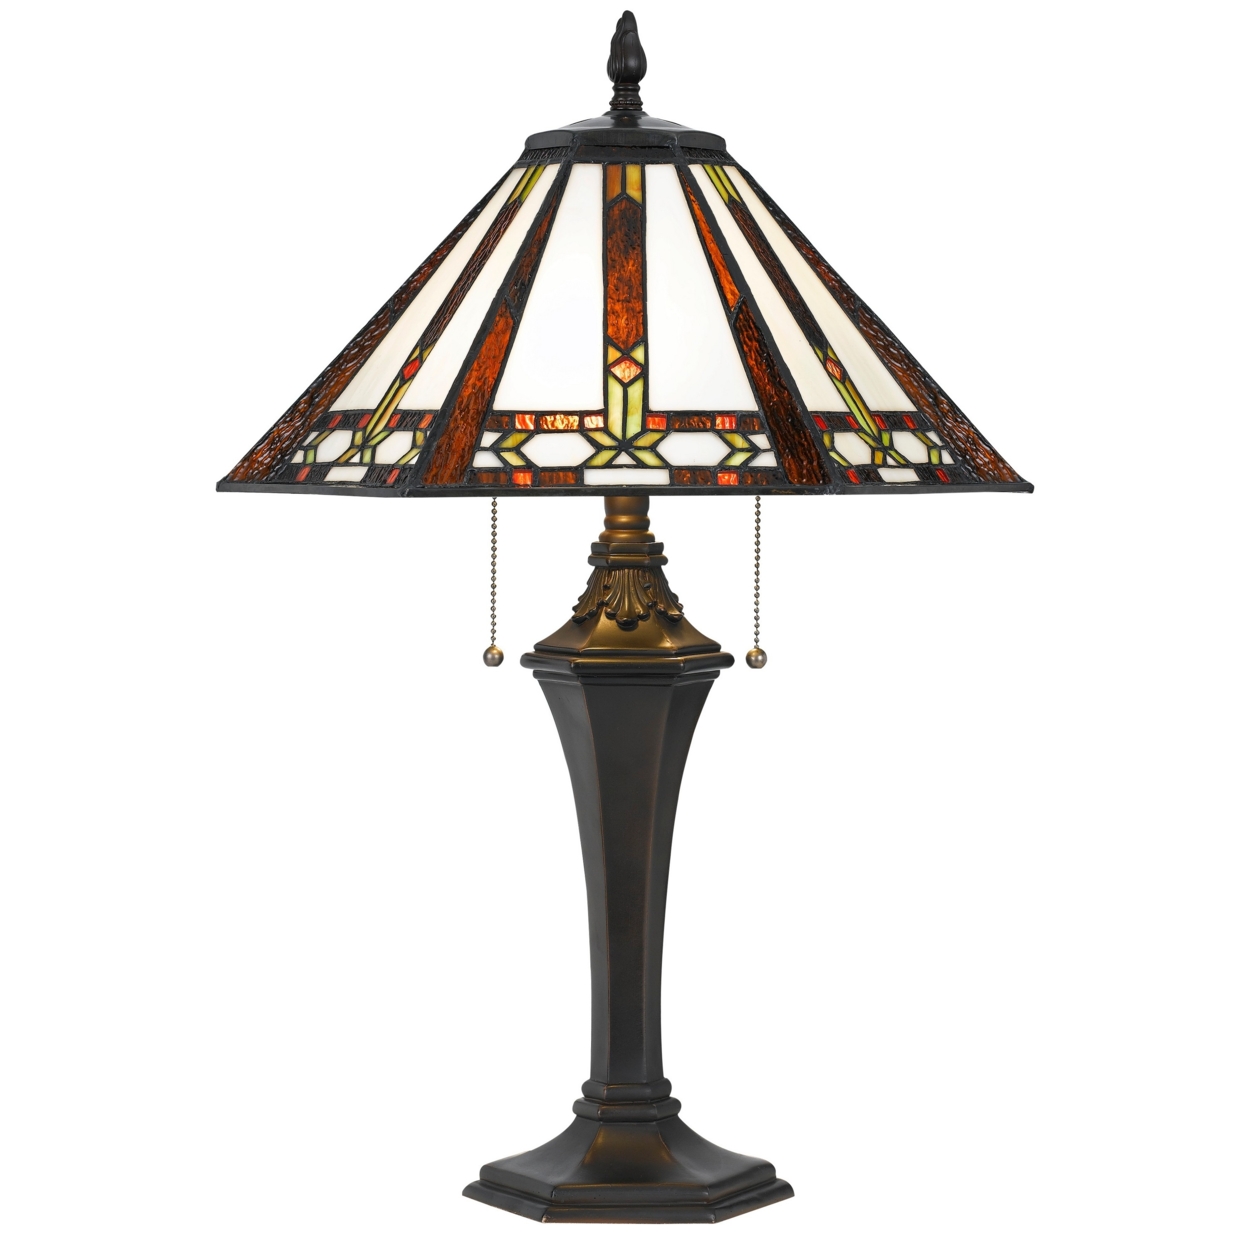 Tiffany Table Lamp With 2 Pull Switches And Resin Pedestal Body, Bronze- Saltoro Sherpi